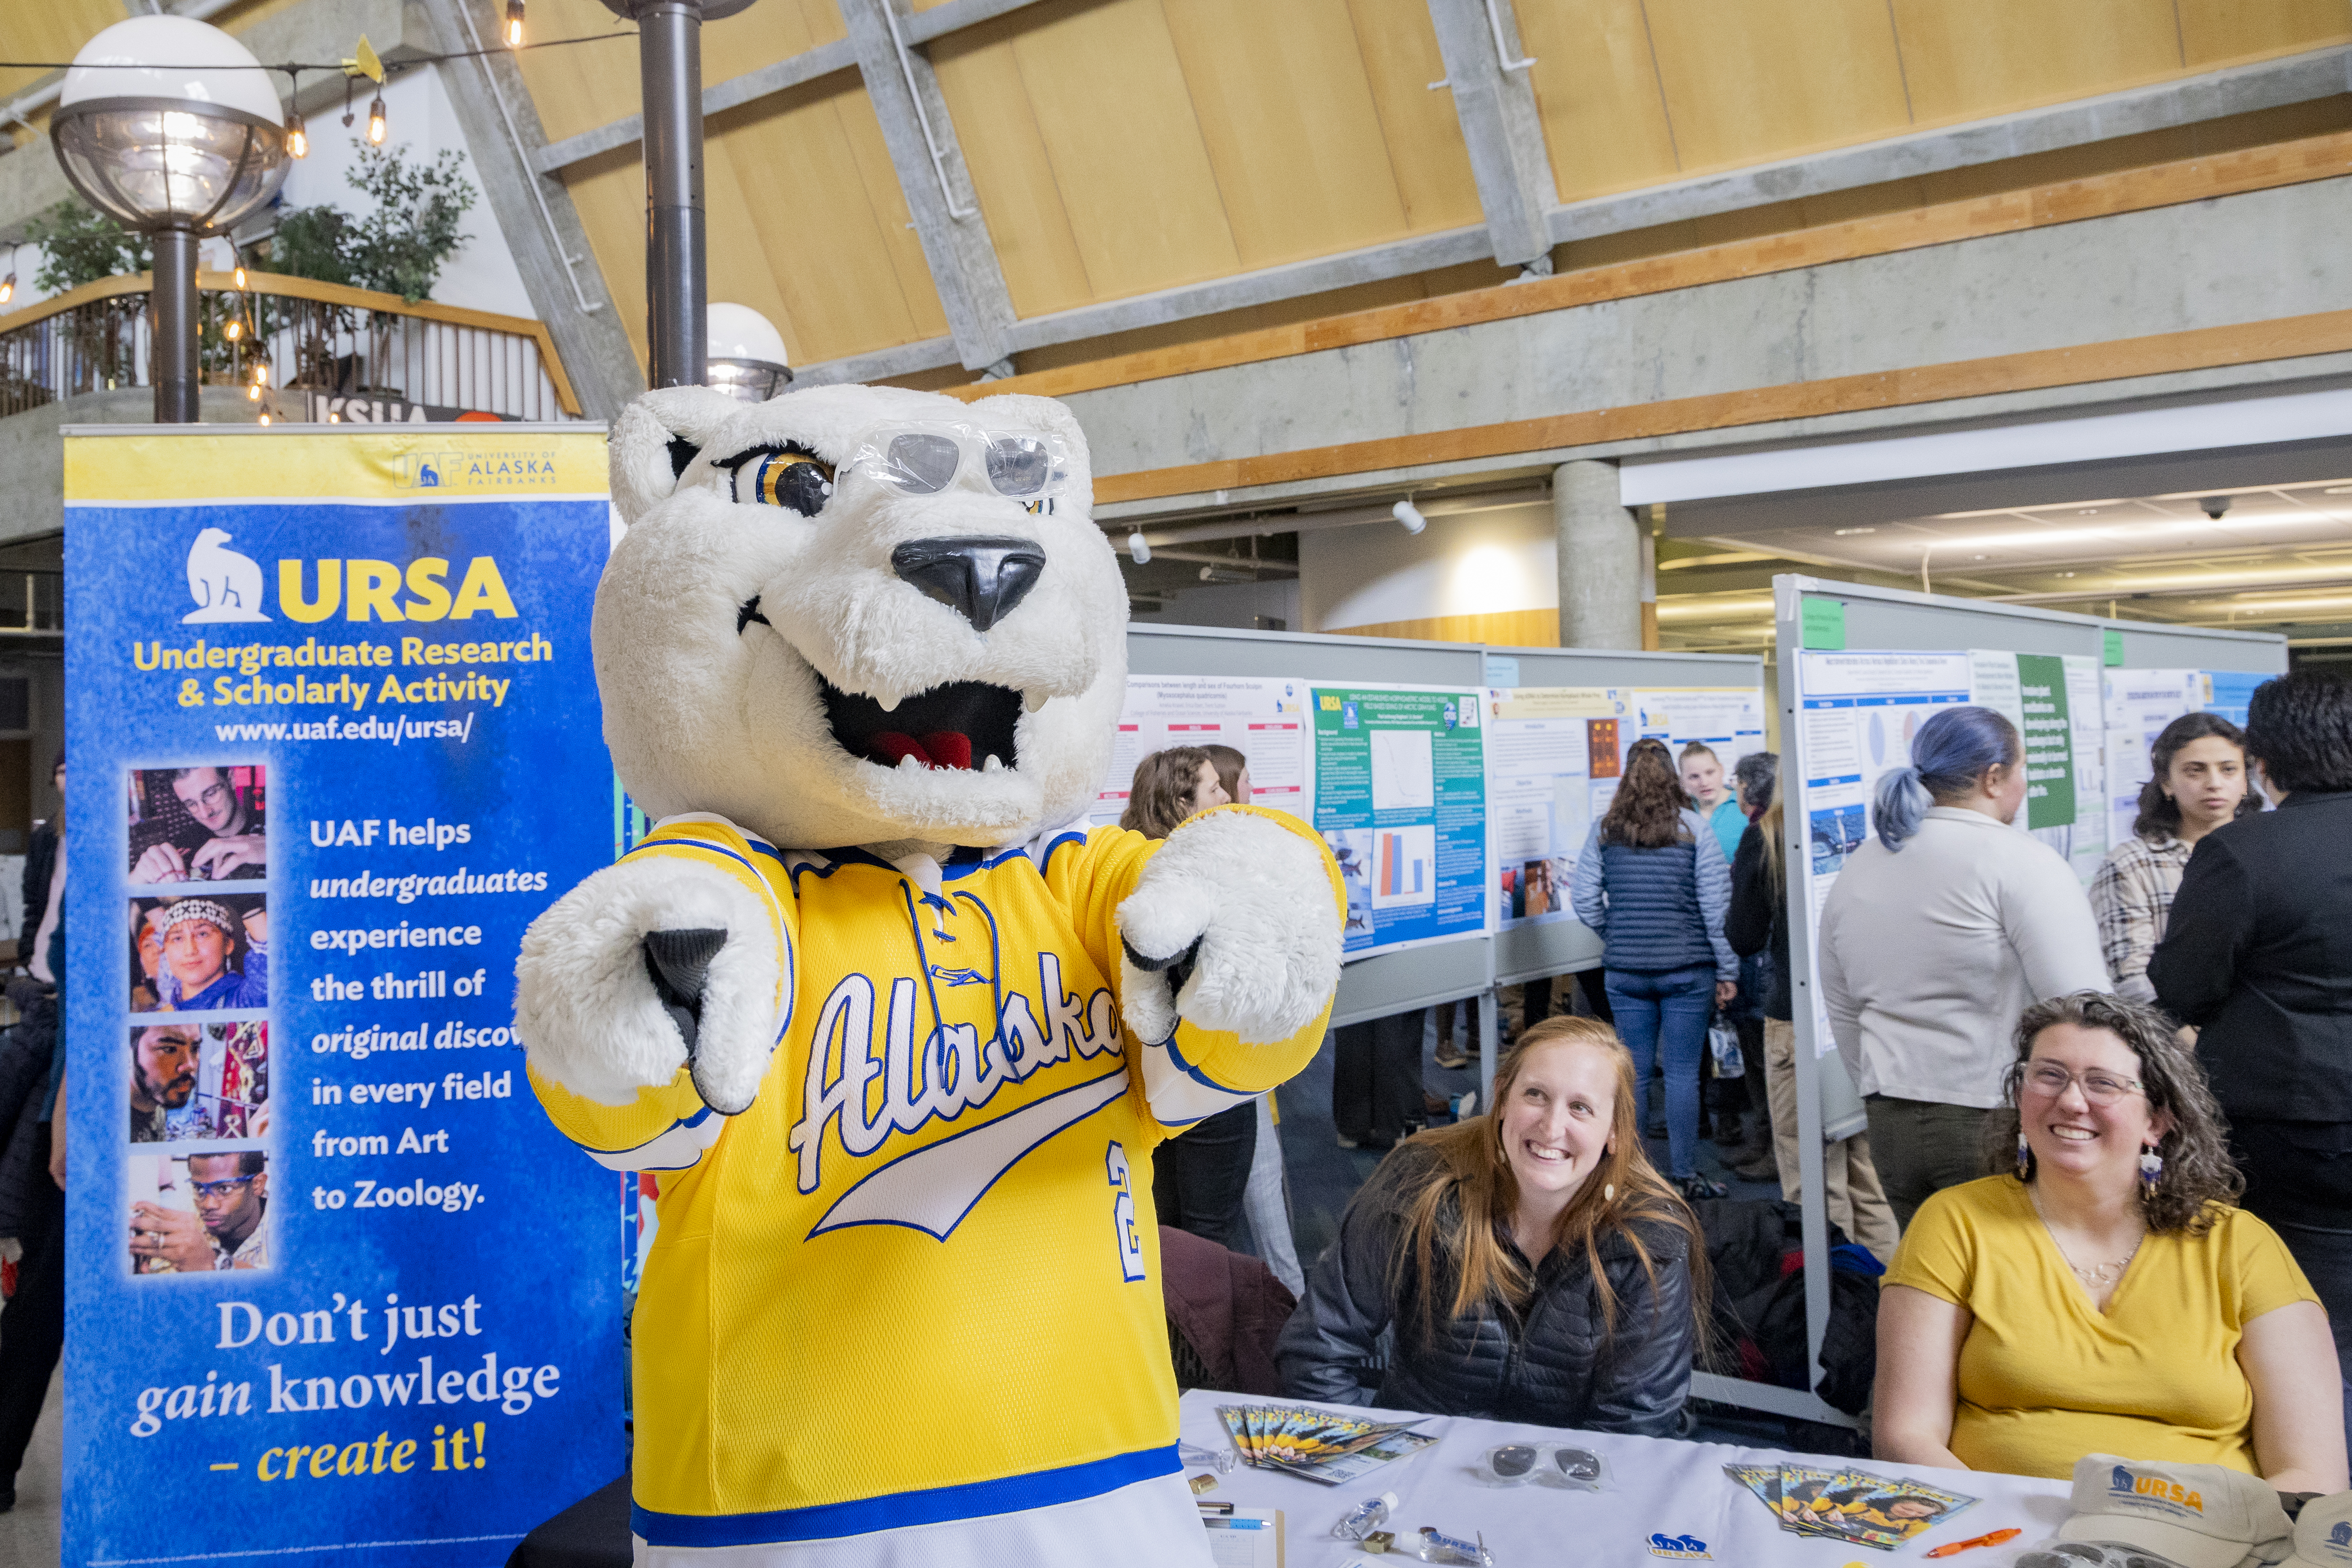 A mascot bear stands next to a table where two people are sitting.